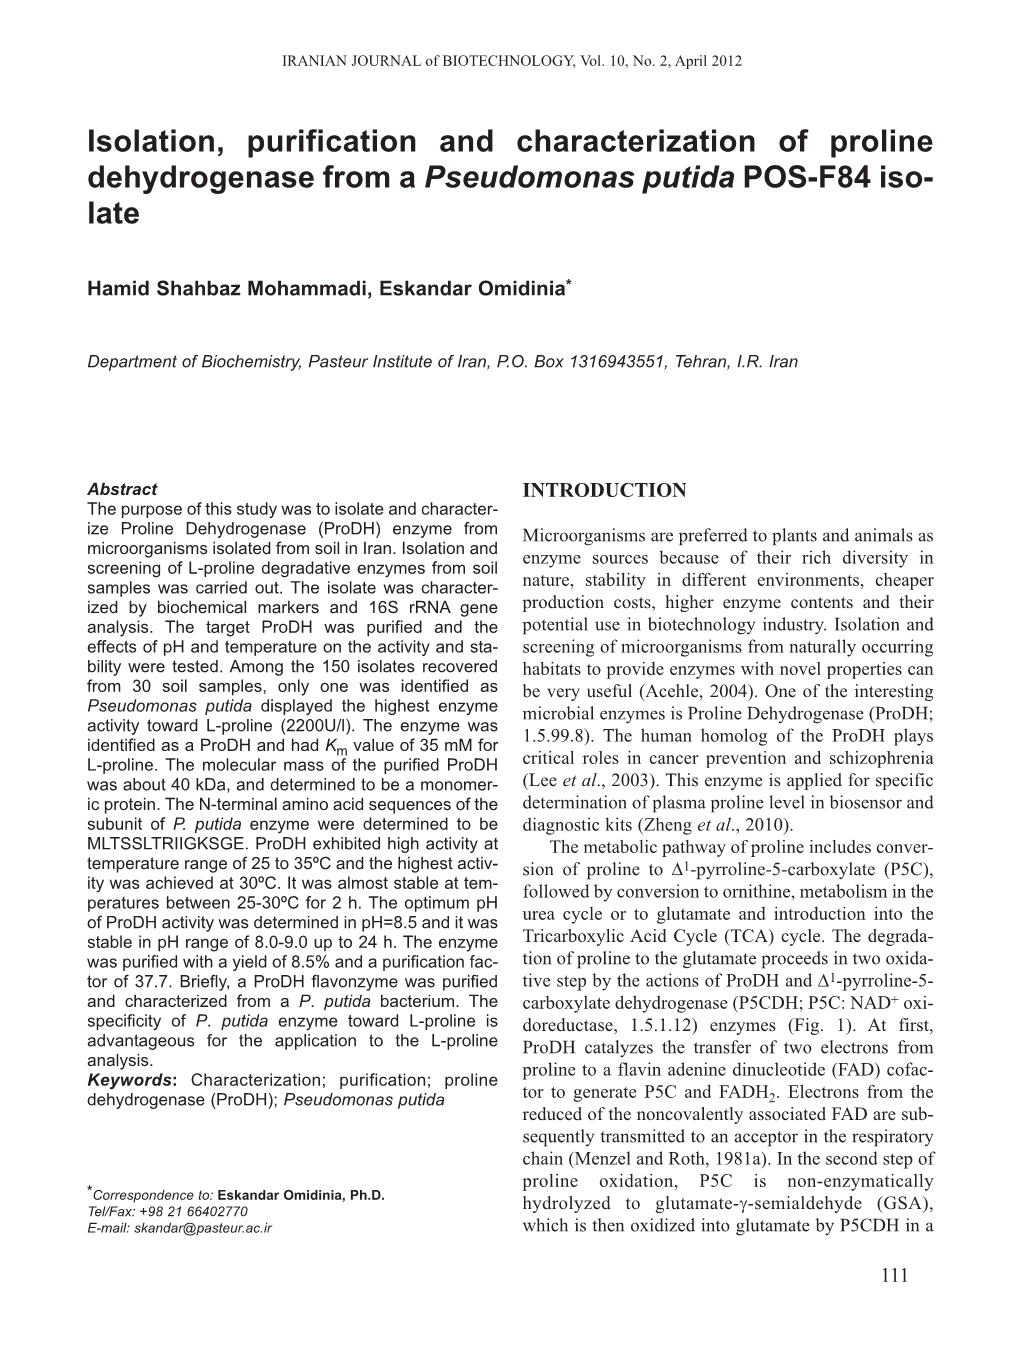 Isolation, Purification and Characterization of Proline Dehydrogenase from a Pseudomonas Putida POS-F84 Iso- Late